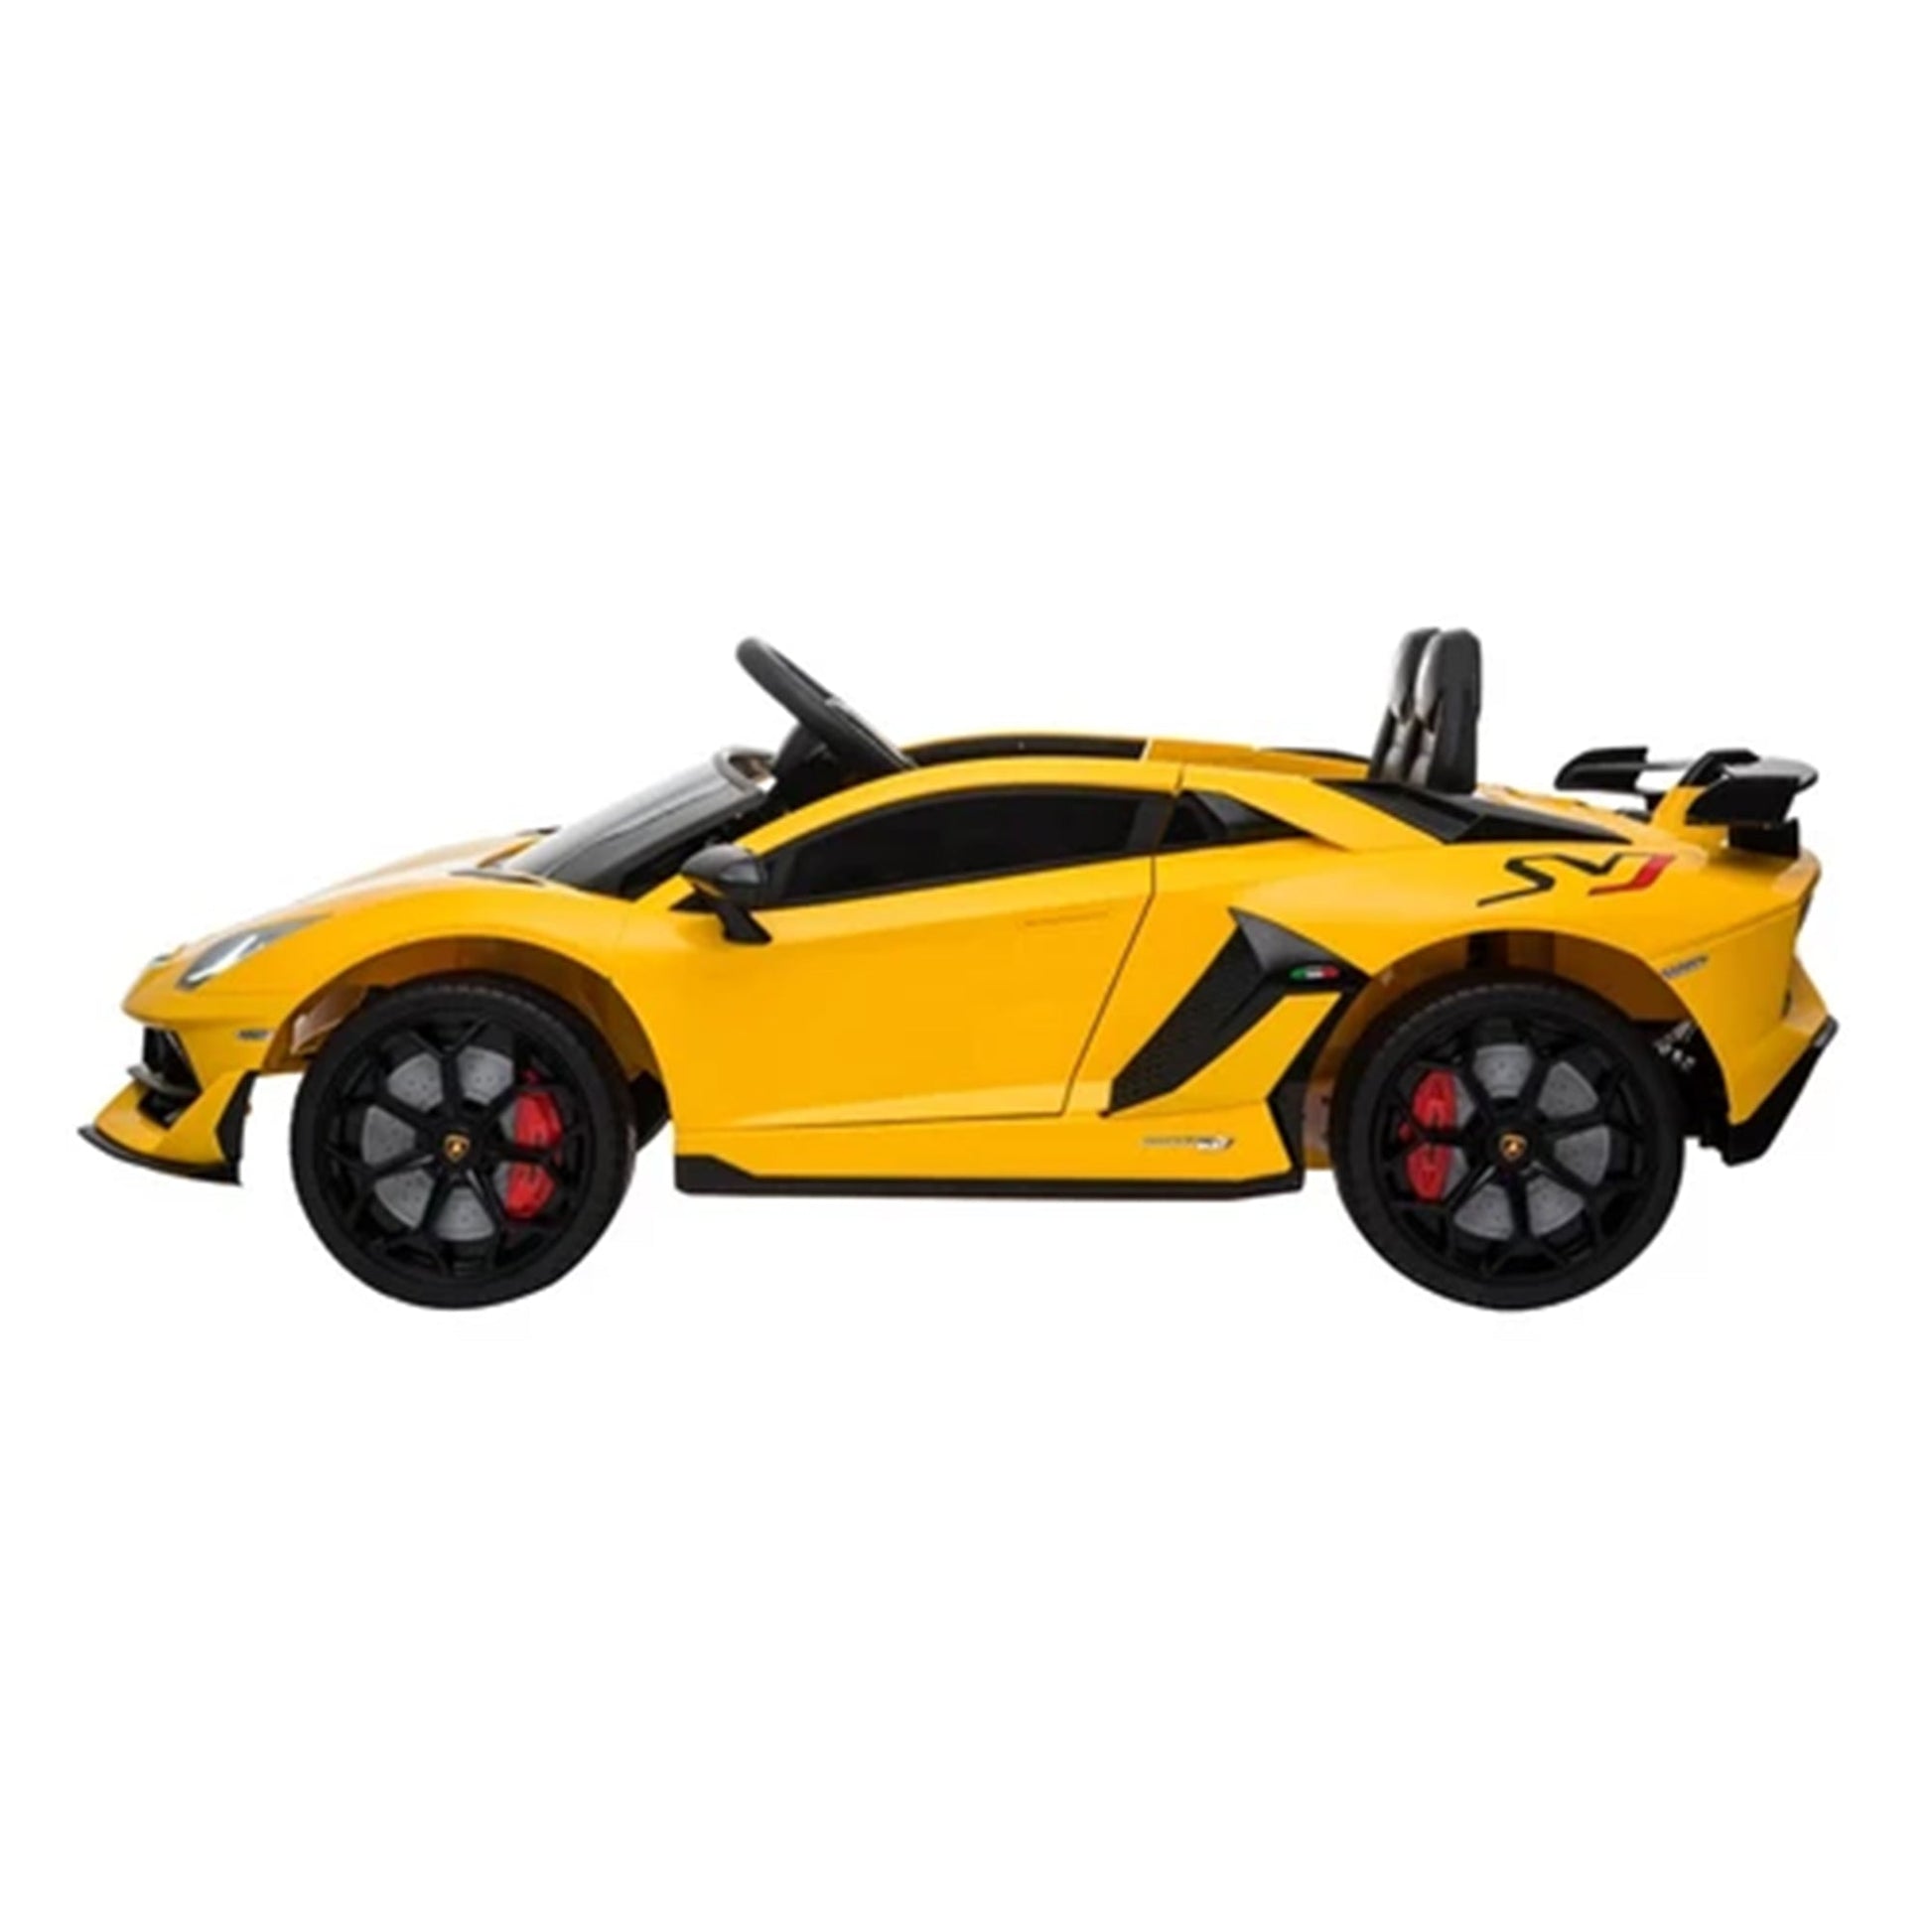 "Yellow LAMBORGHINI SVJ 12 Volt ride-on from KidsCar.co.uk, with parental remote control and leather seats, against a white background."